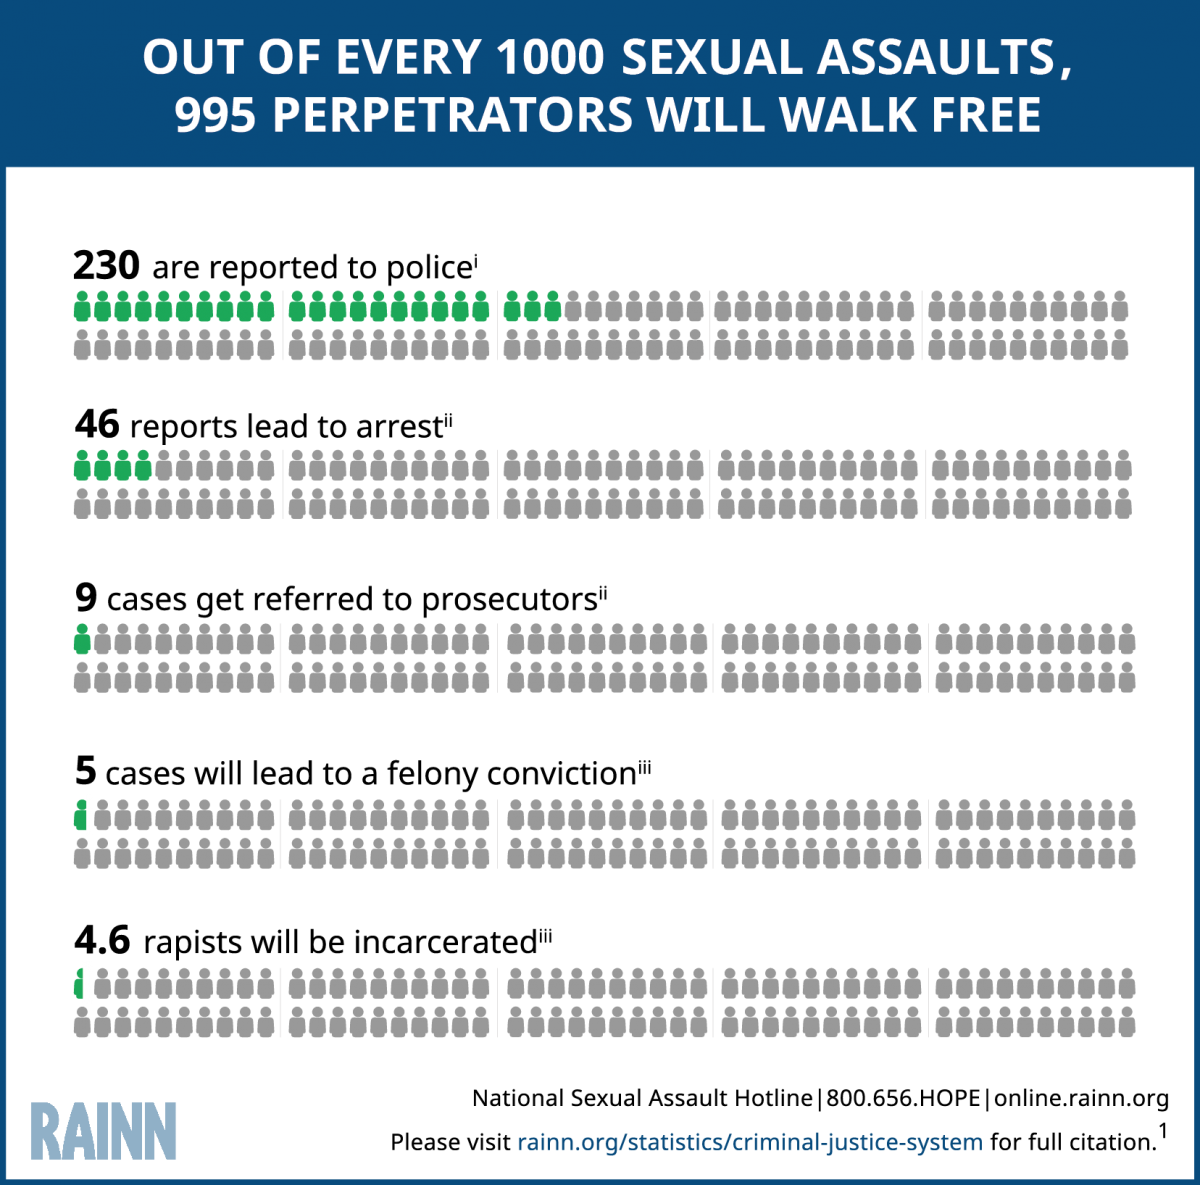 Graphic demonstrating that out of 1000 sexual assaults, 995 perpetrators will walk free. Out of every 1,000 rapes, 310 are reported to the police, 57 reports lead to arrest, 13 cases get referred to prosecutors, 7 cases will lead to a felony conviction, 6 rapists will be incarcerated.